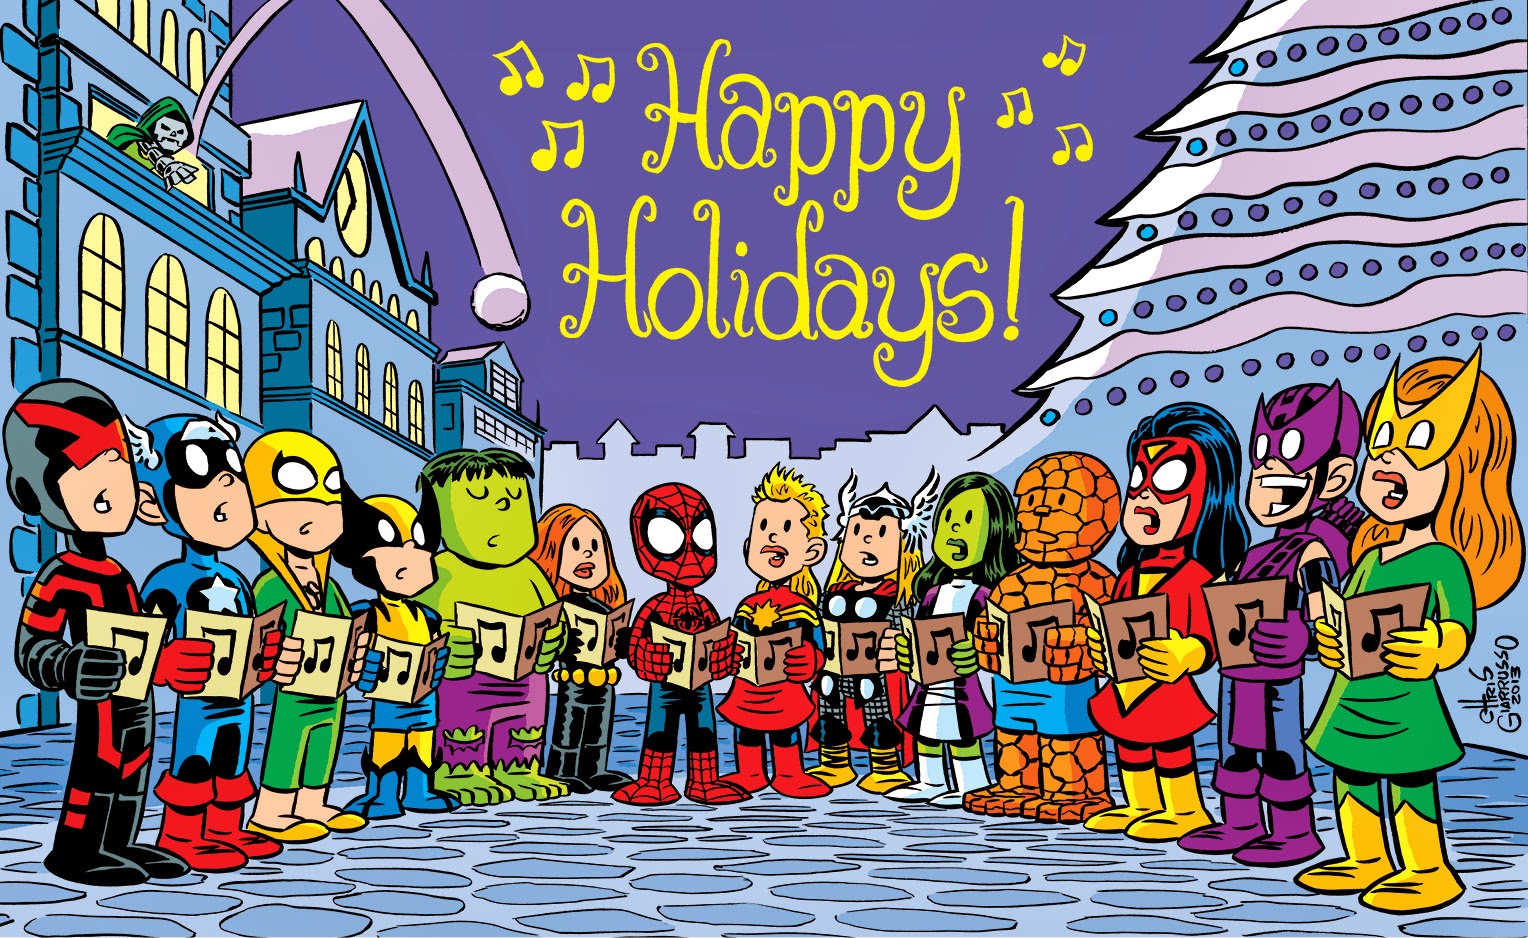 the_marvel_project_2013_holiday_card_final_chris_giarrusso_december_2013.jpg